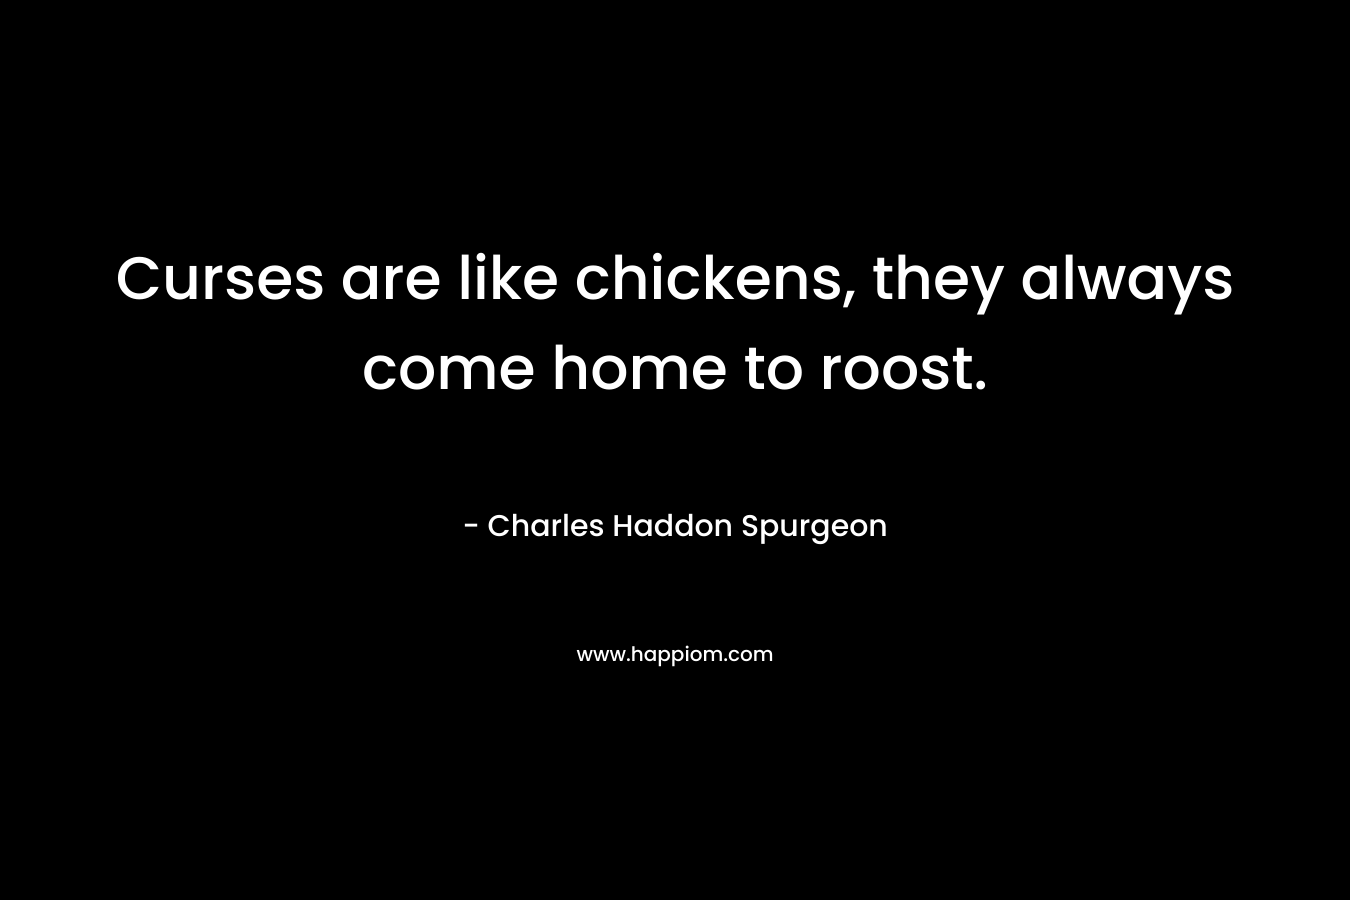 Curses are like chickens, they always come home to roost. – Charles Haddon Spurgeon